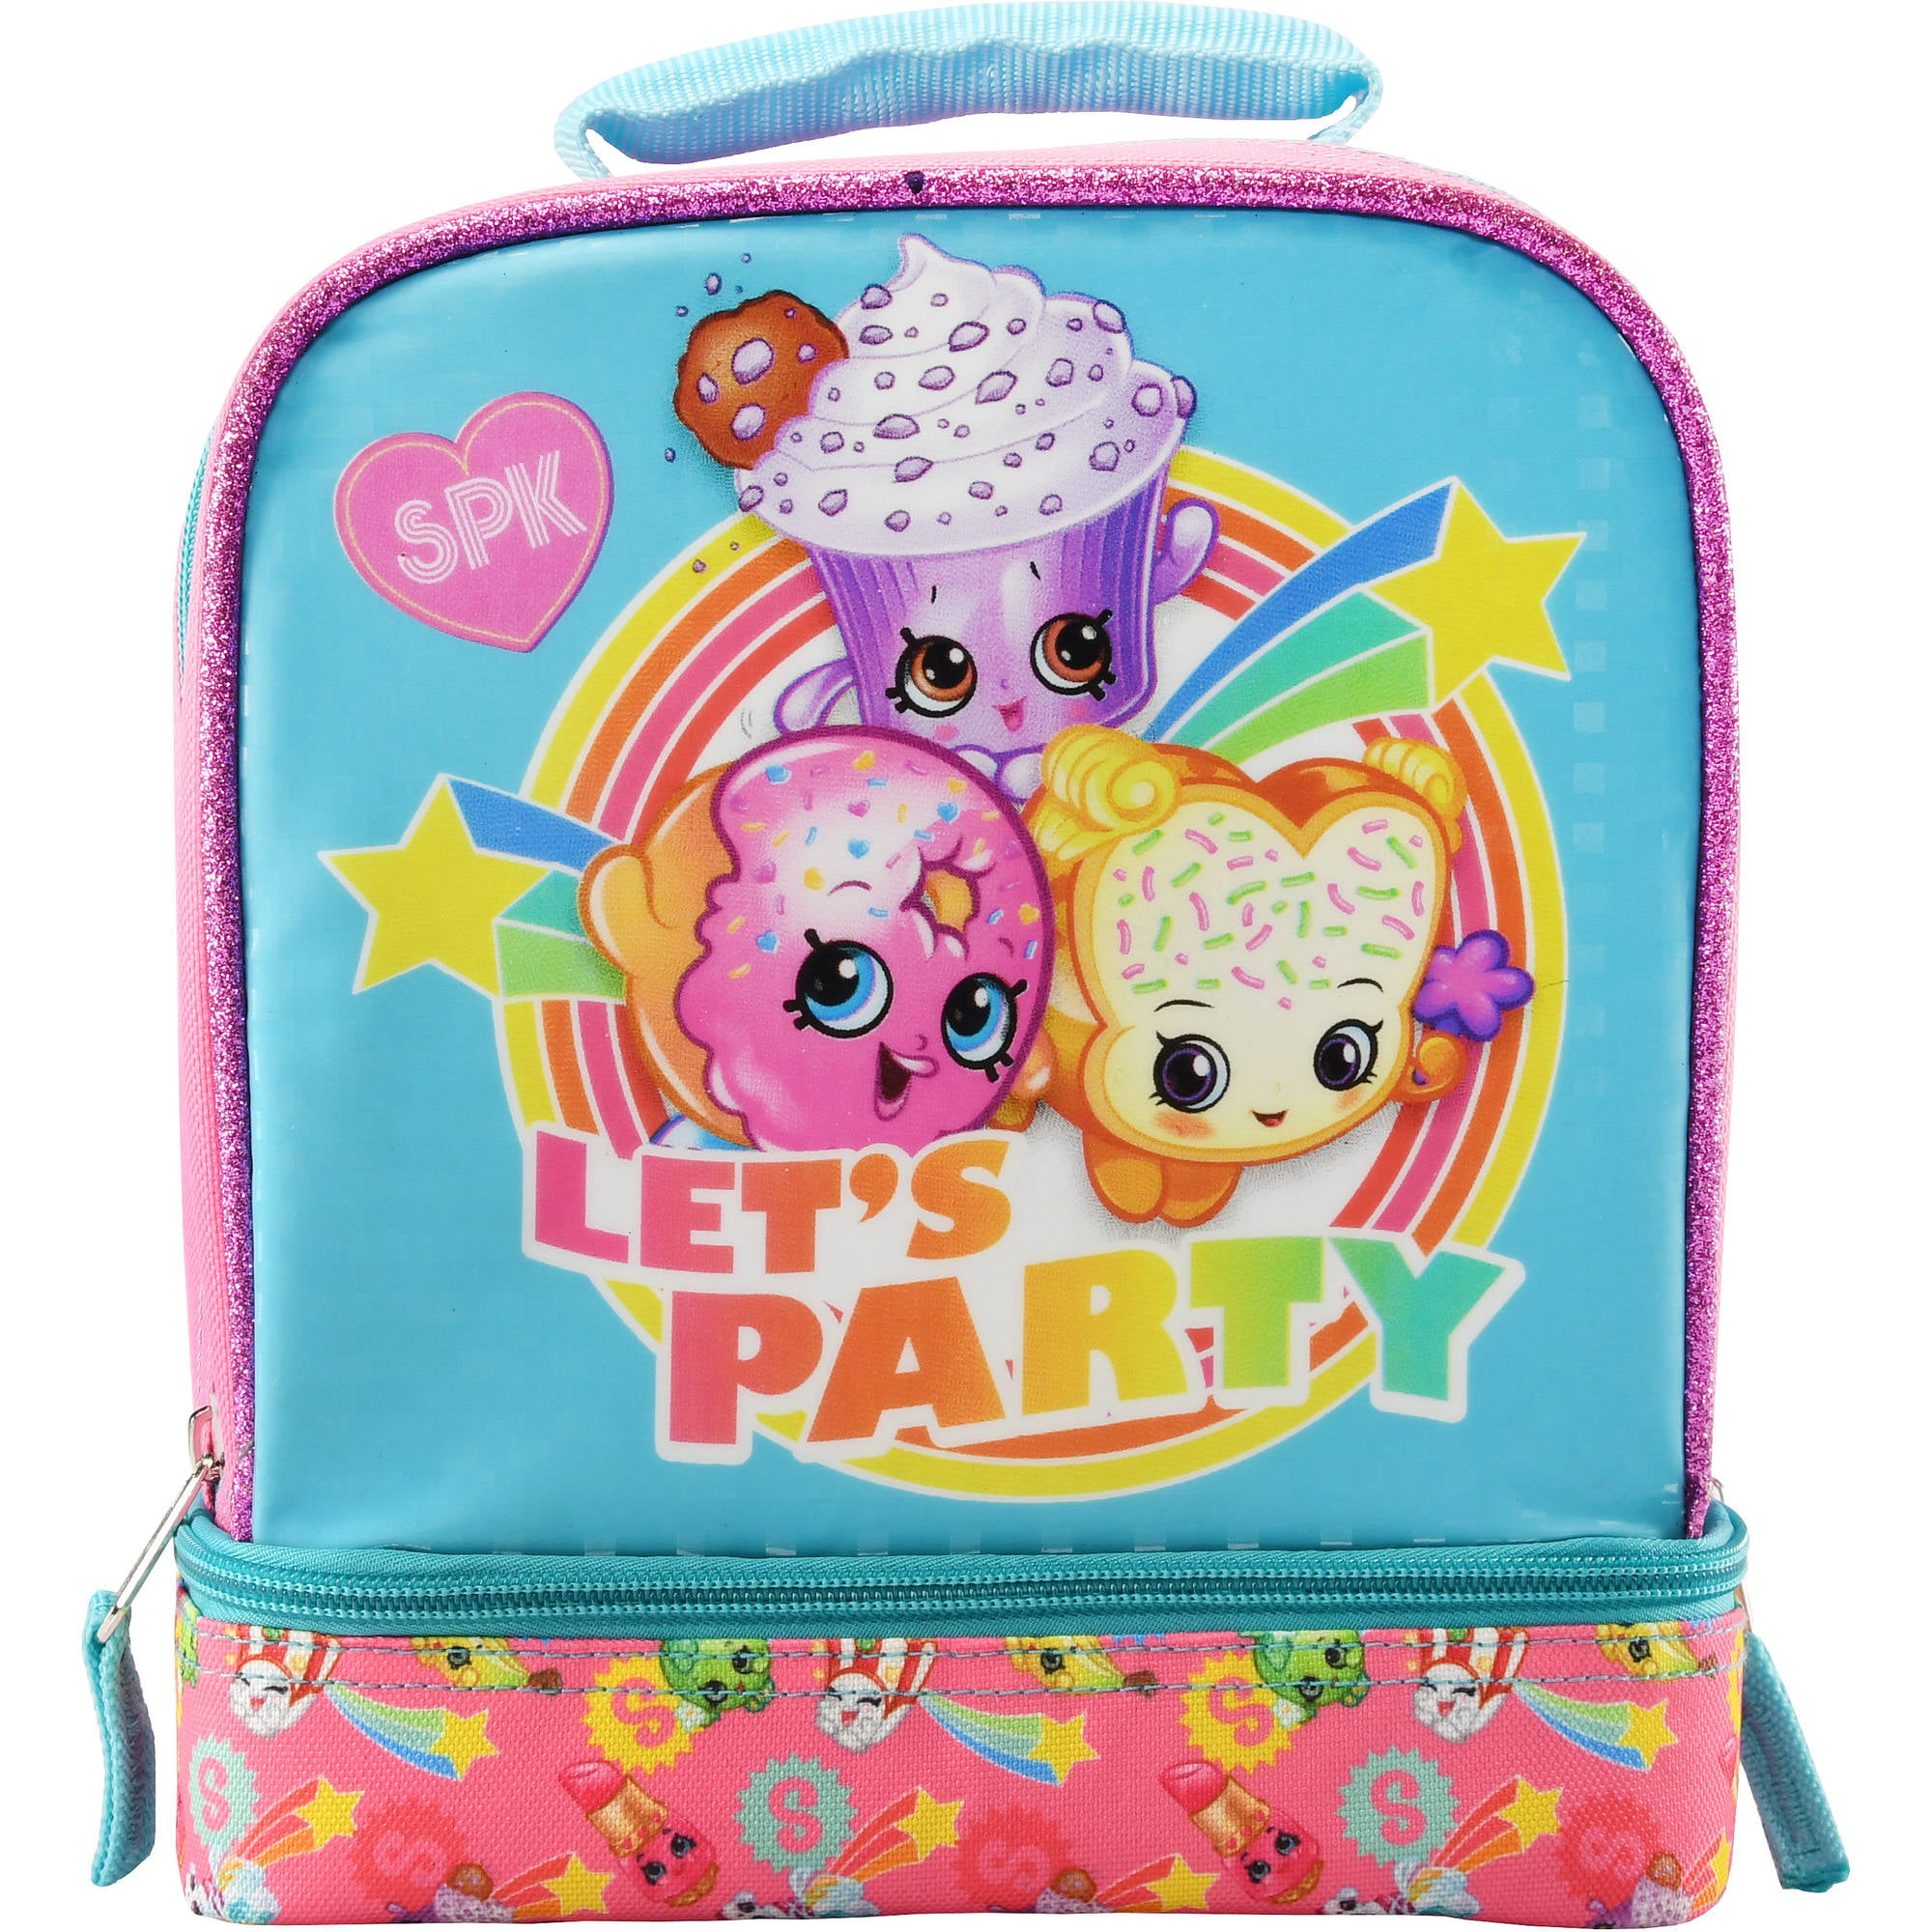 SHOPKINS BACKPACK & LUNCH BOX SET! BESTIES FOR LIFE PURPLE LARGE BAG 16”  NWT